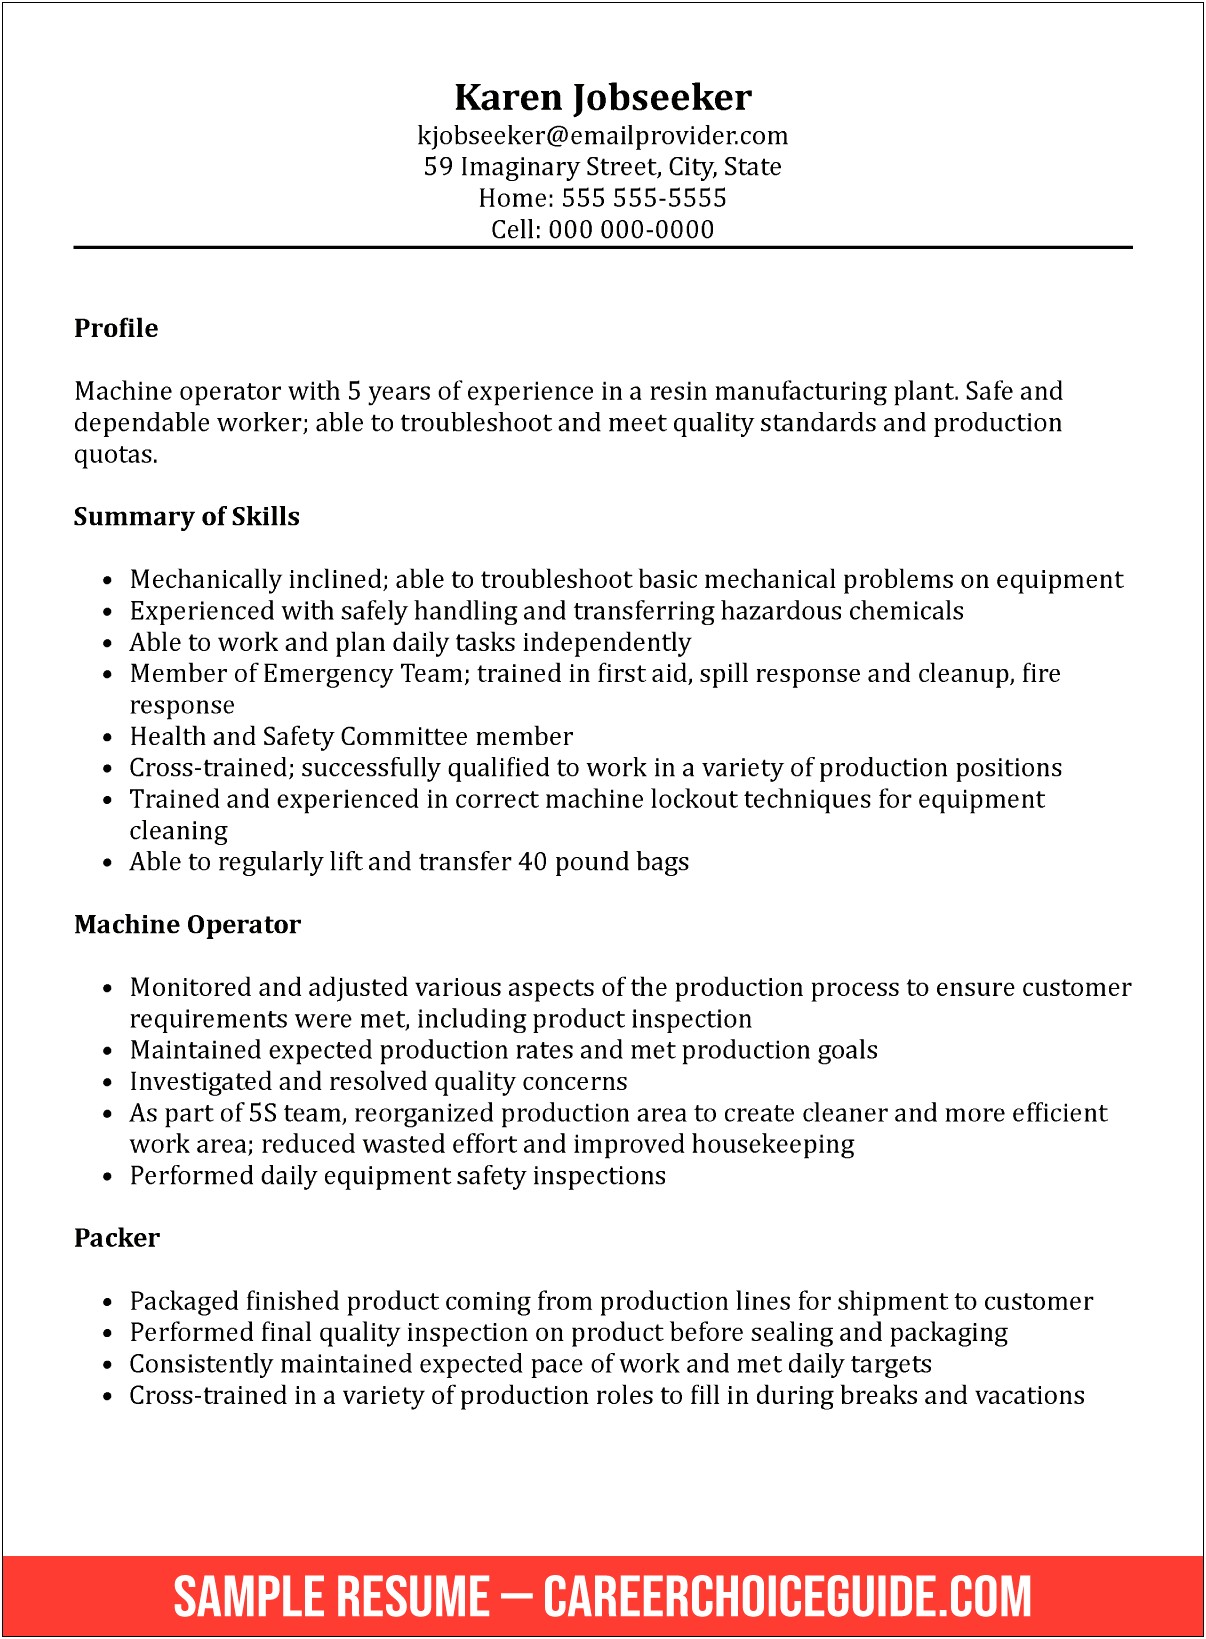 Opening Summary For Resume Examples